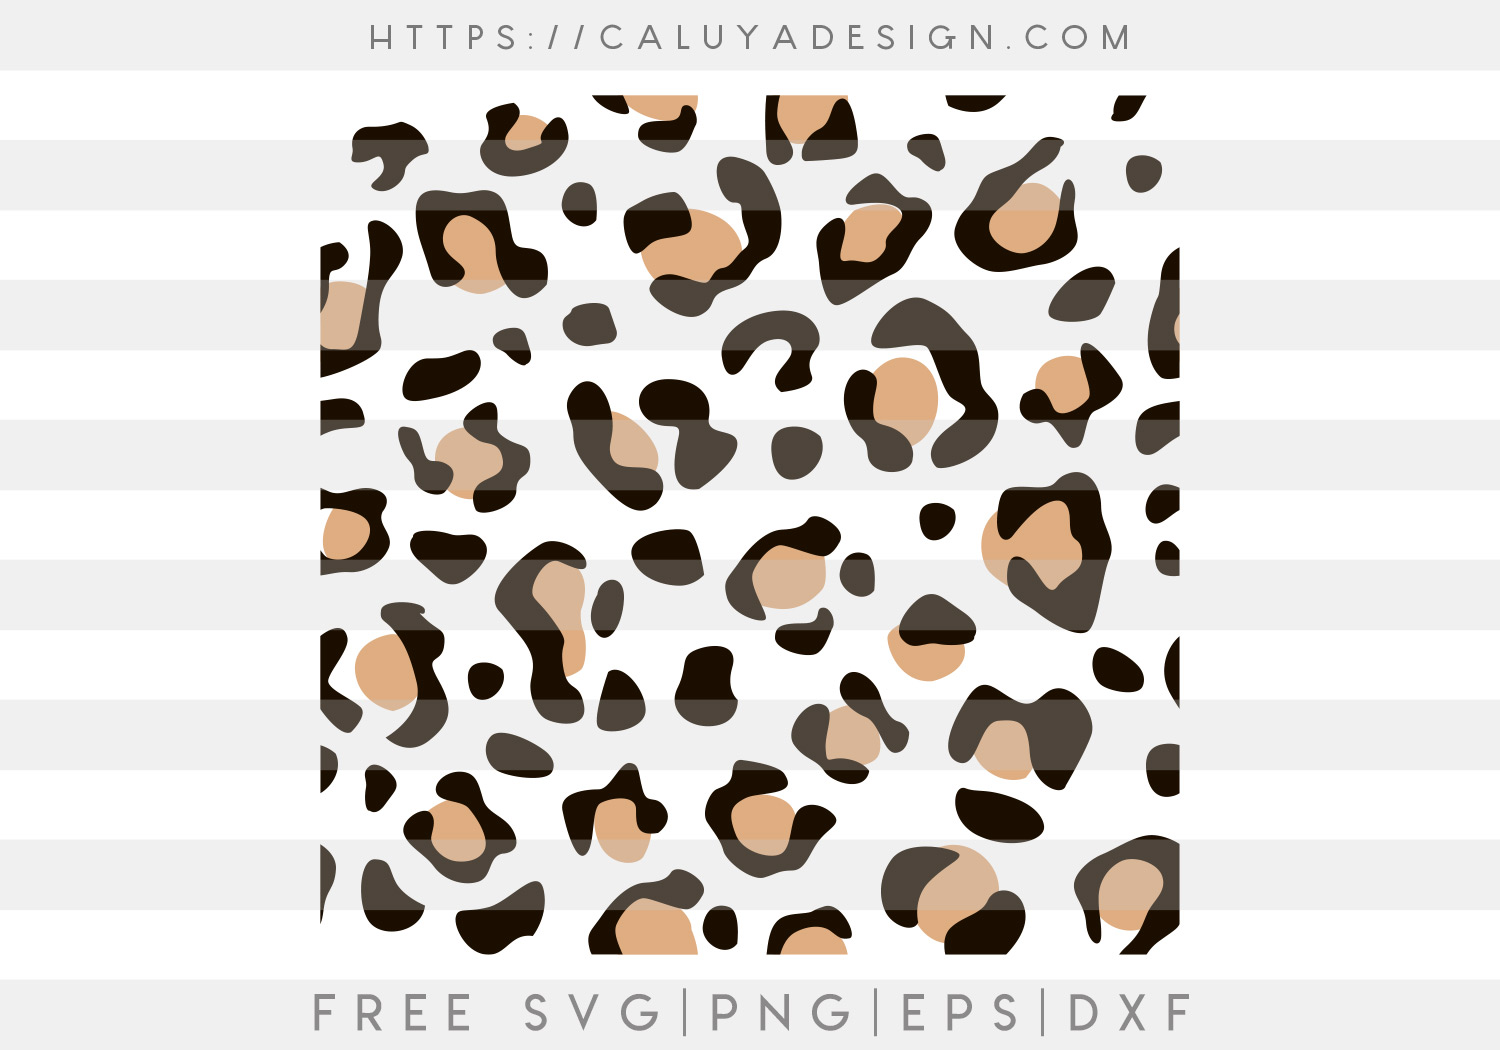 Colored Leopard SVG, PNG, EPS & DXF